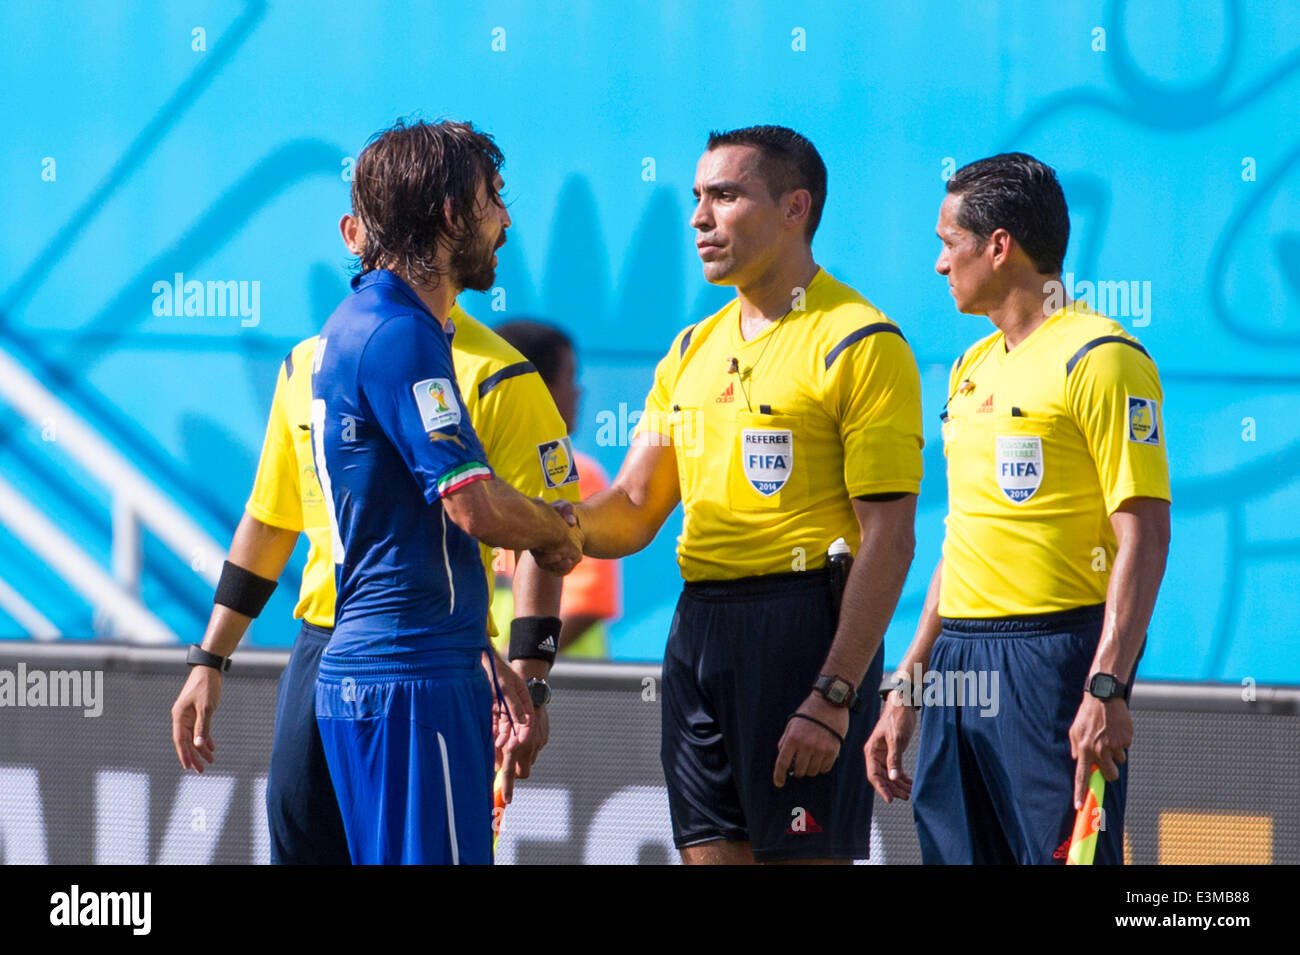 Natal, Brazil. 24th June, 2014. Andrea Pirlo (ITA) Football/Soccer : Andrea Pirlo of Italy shakes hands with referee Marco Rodriguez after the FIFA World Cup Brazil 2014 Group D match between Italy 0-1 Uruguay at Estadio das Dunas in Natal, Brazil . Credit:  Maurizio Borsari/AFLO/Alamy Live News Stock Photo